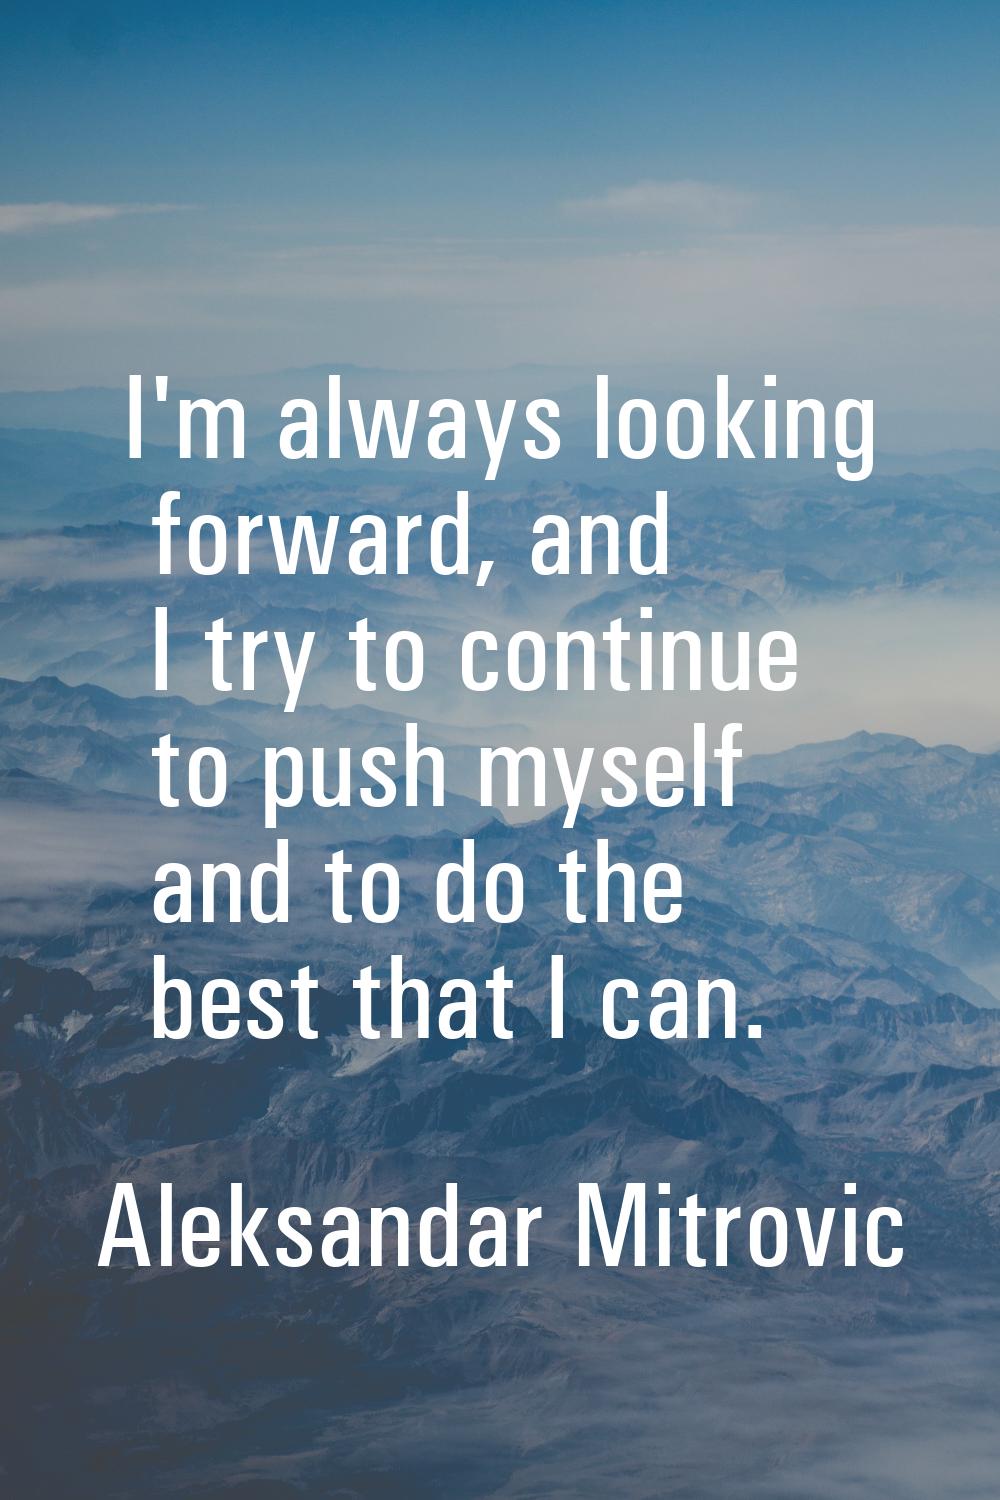 I'm always looking forward, and I try to continue to push myself and to do the best that I can.